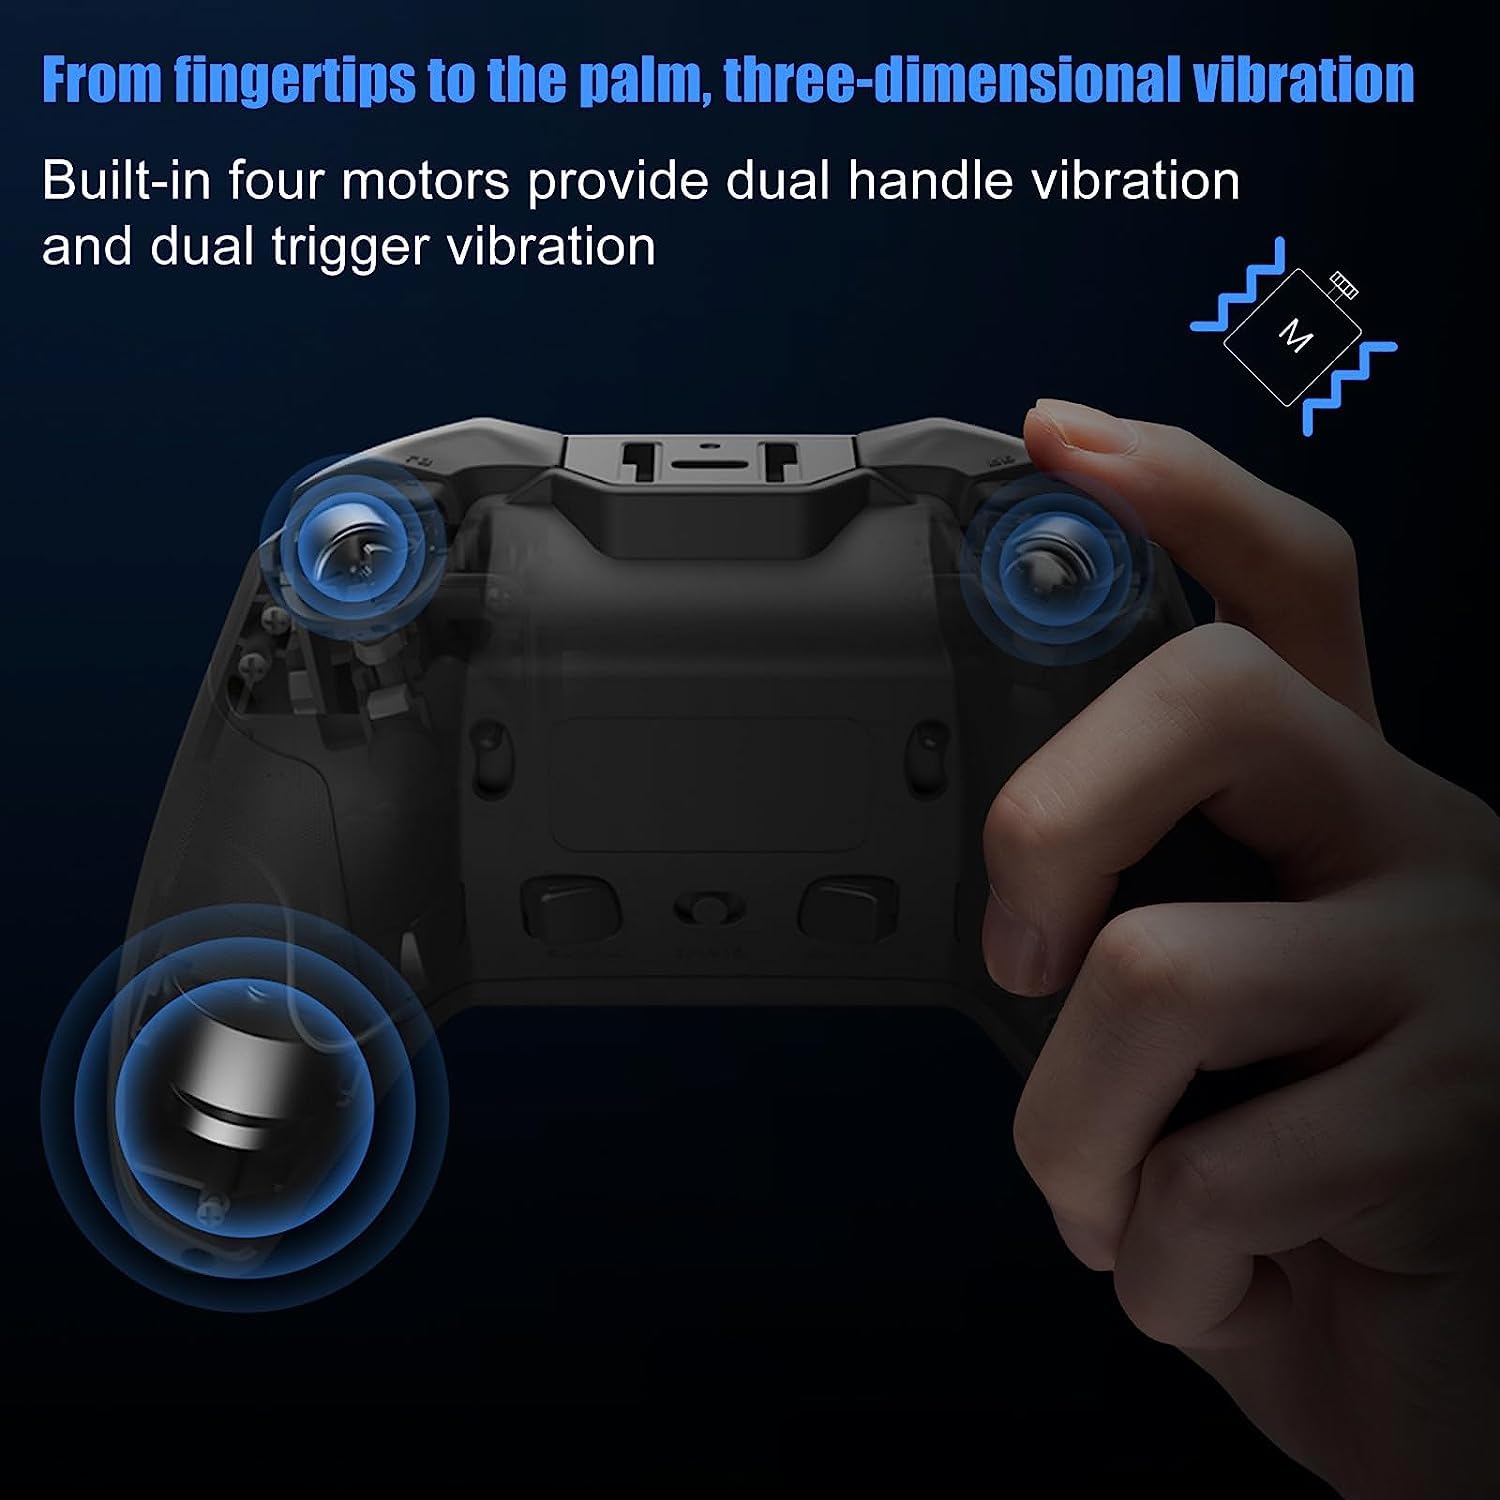 Flydigi Vader 3 Pro Wireless Game Controller, Dual-Motor Vibration Feedback, Hall Gaming Trigger and Microswitch Trigger Changeable, 3ms Ultra-Low Latency, 500Hz High Polling Rate, Multi-Platform Gaming controller for PC, Nintendo Switch, TV Box, Android